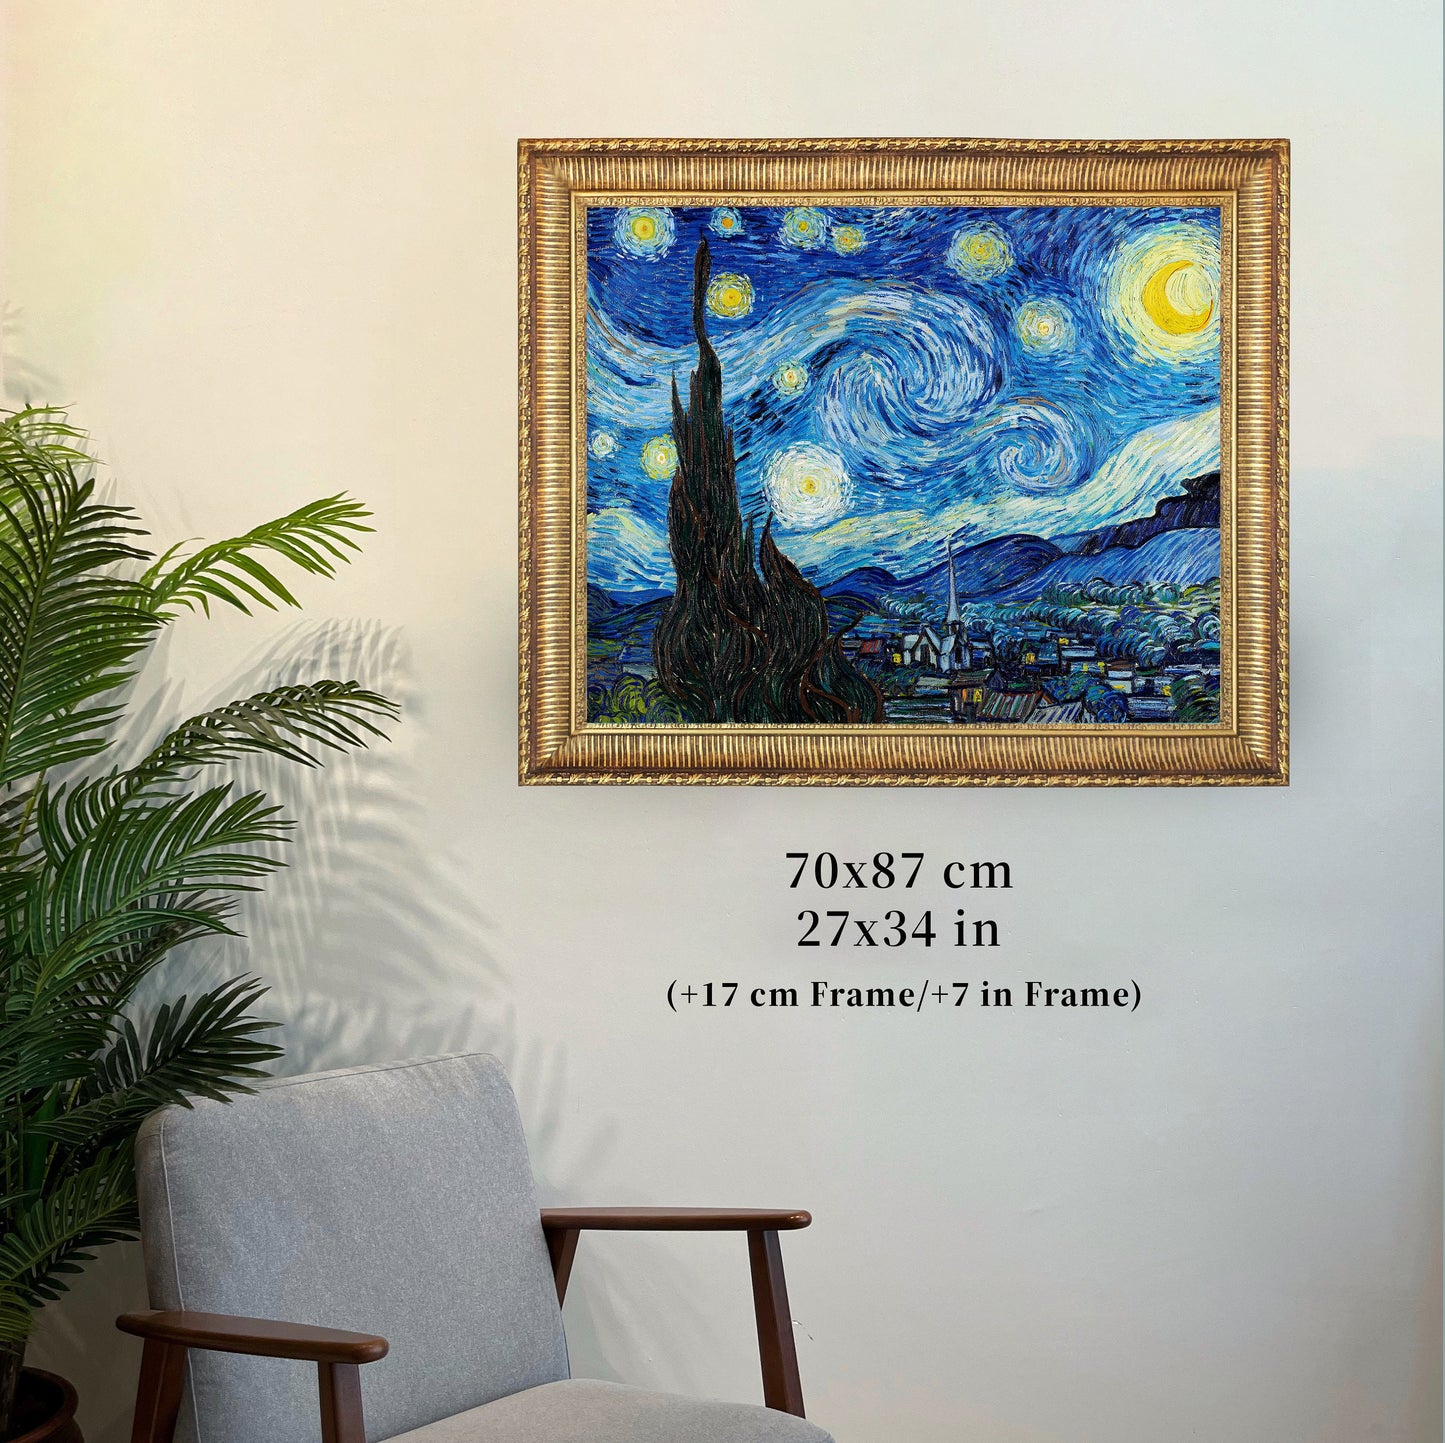 Starry Night by Vincent Van Gogh, 3d Printed with texture and brush strokes looks like original oil-painting, code:064